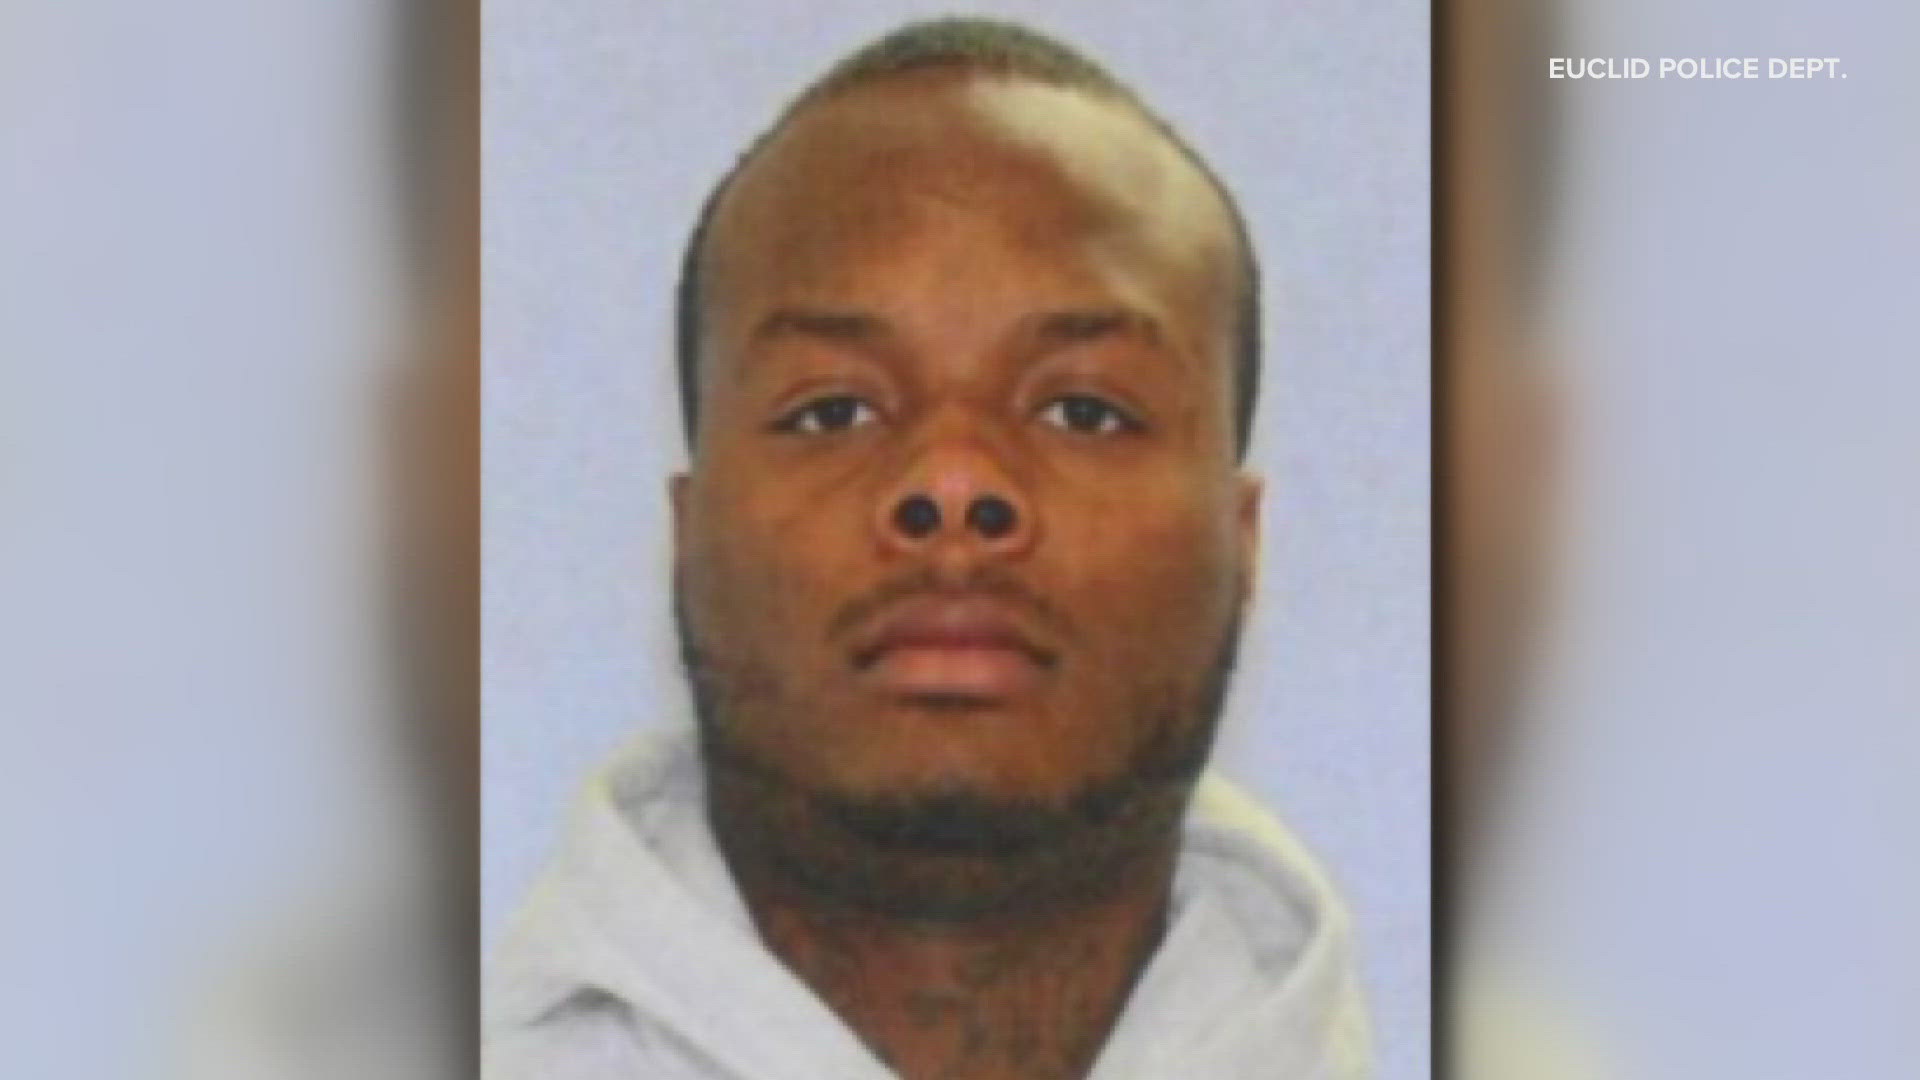 The suspect, identified as 24-year-old Deshawn Anthony Vaughn, died after an hours-long standoff in Shaker Heights.